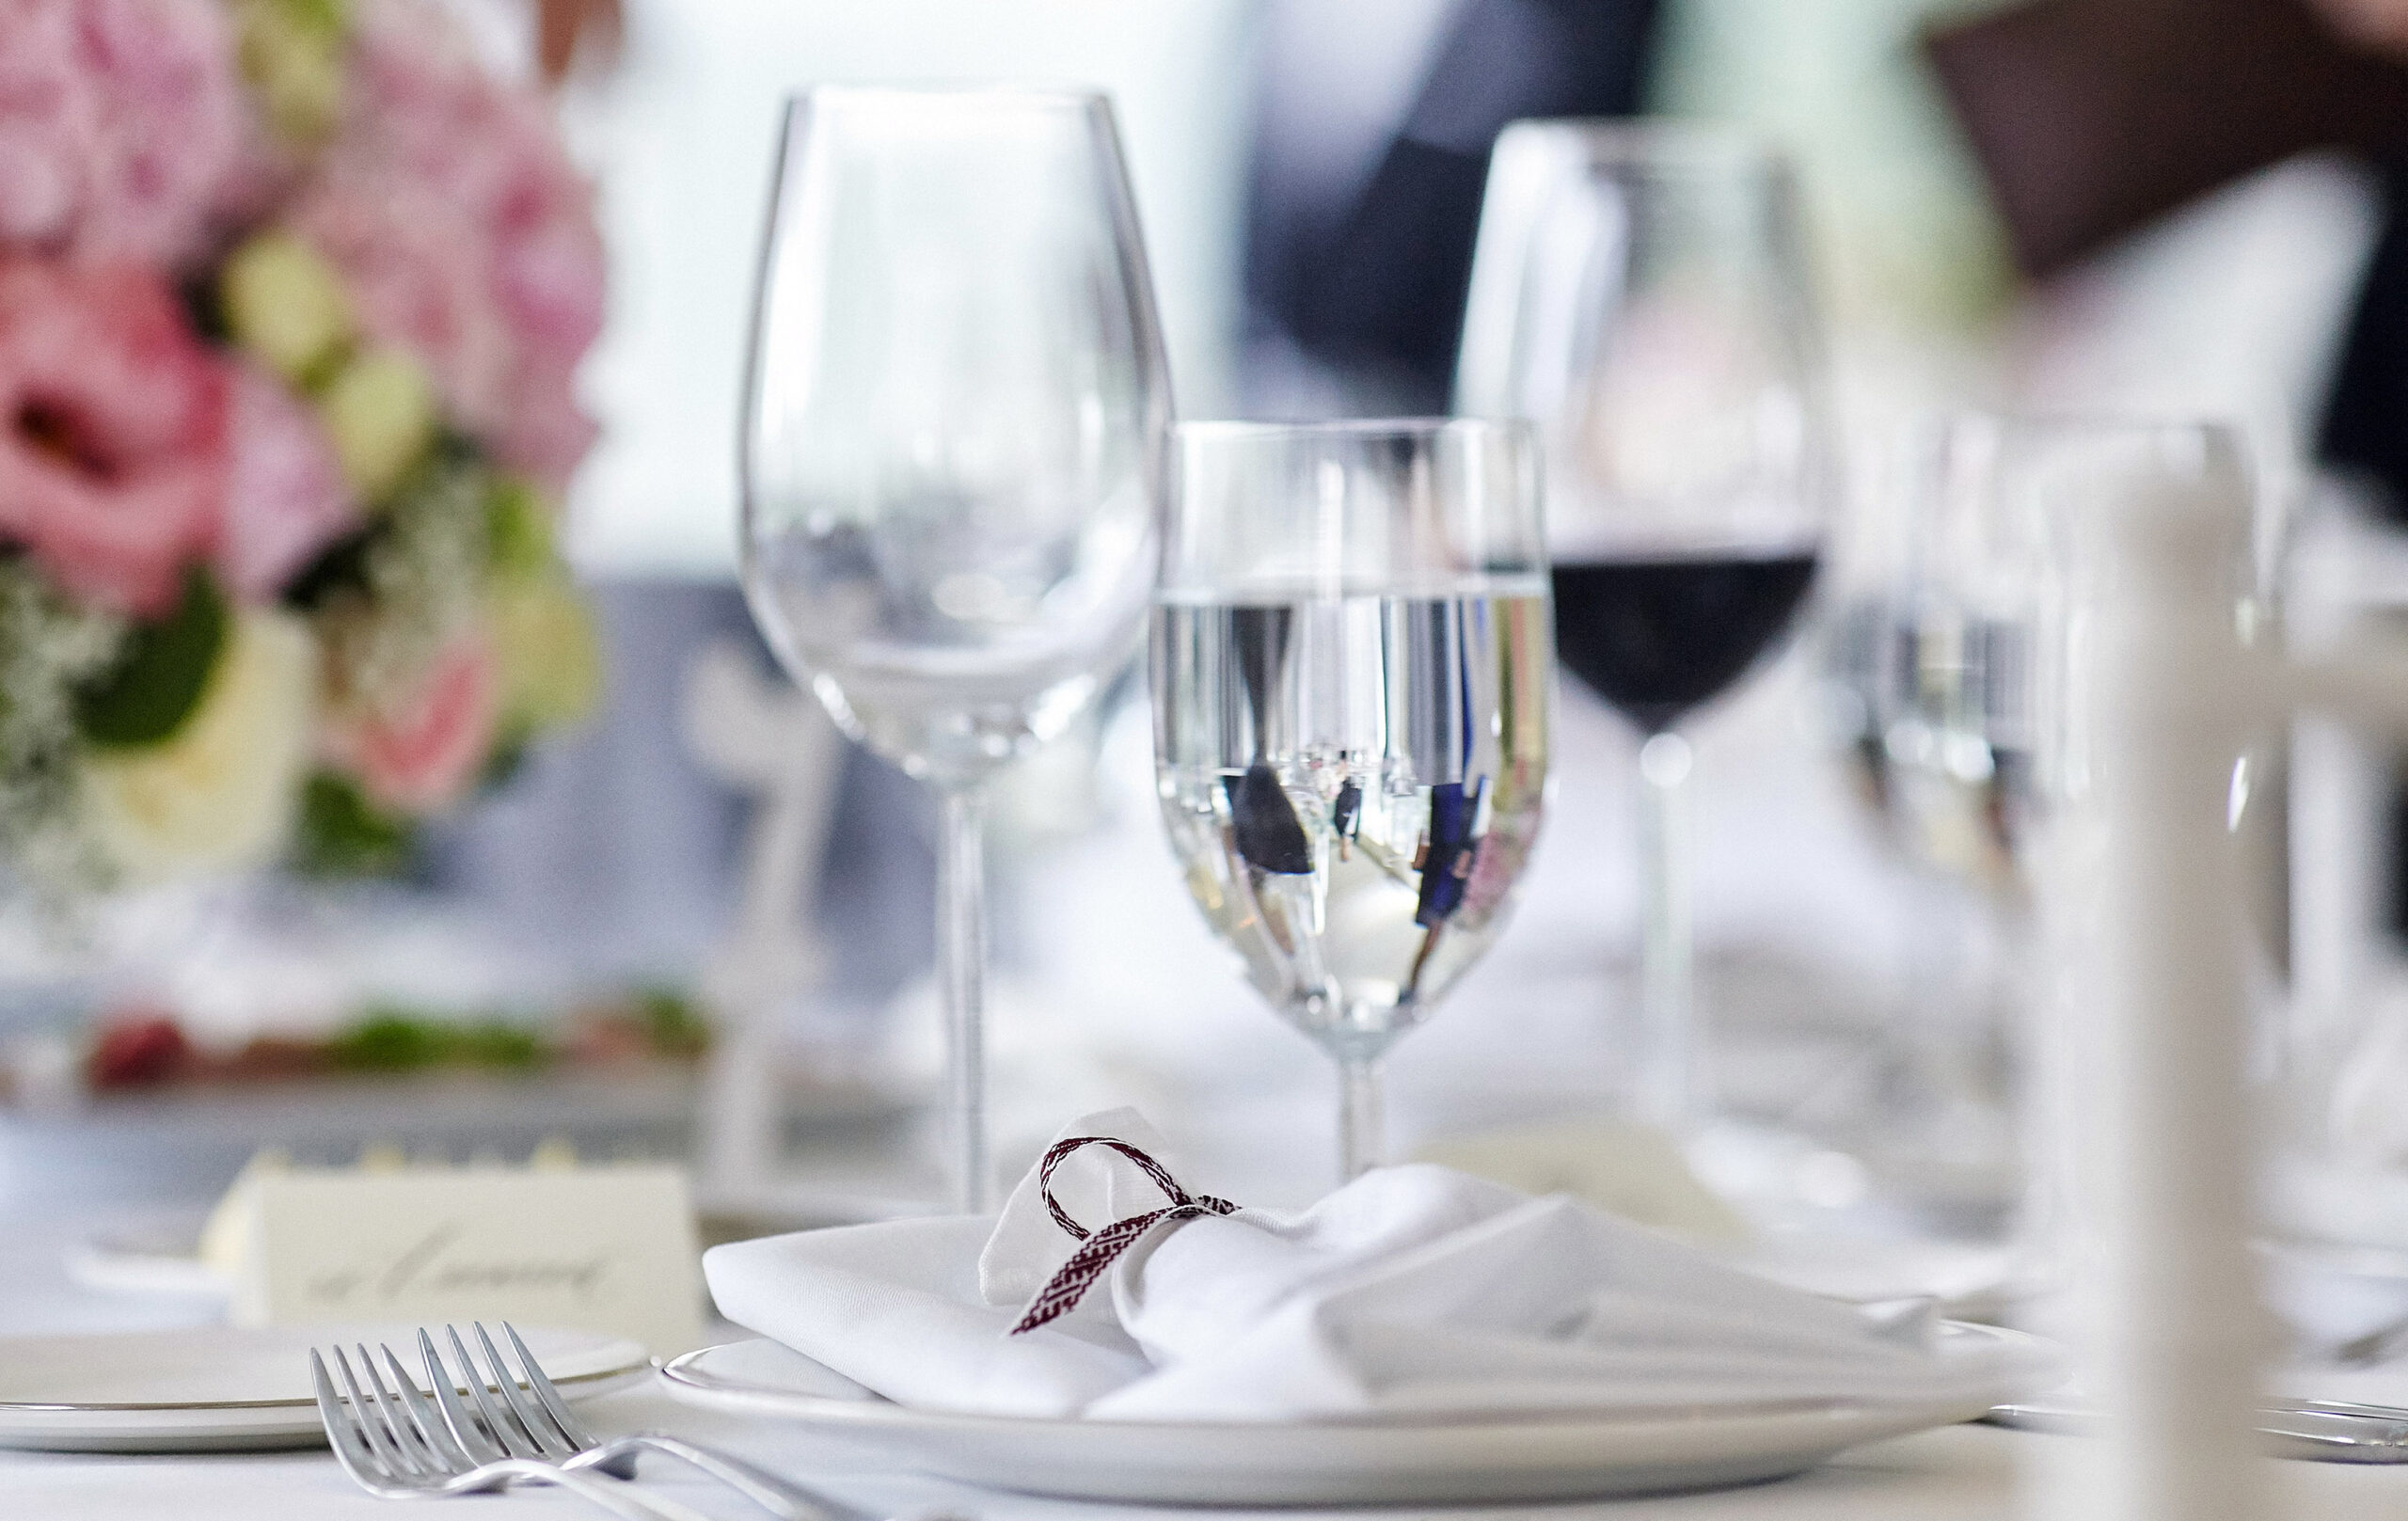 Close-up image of a table on a festive event, party or wedding reception.